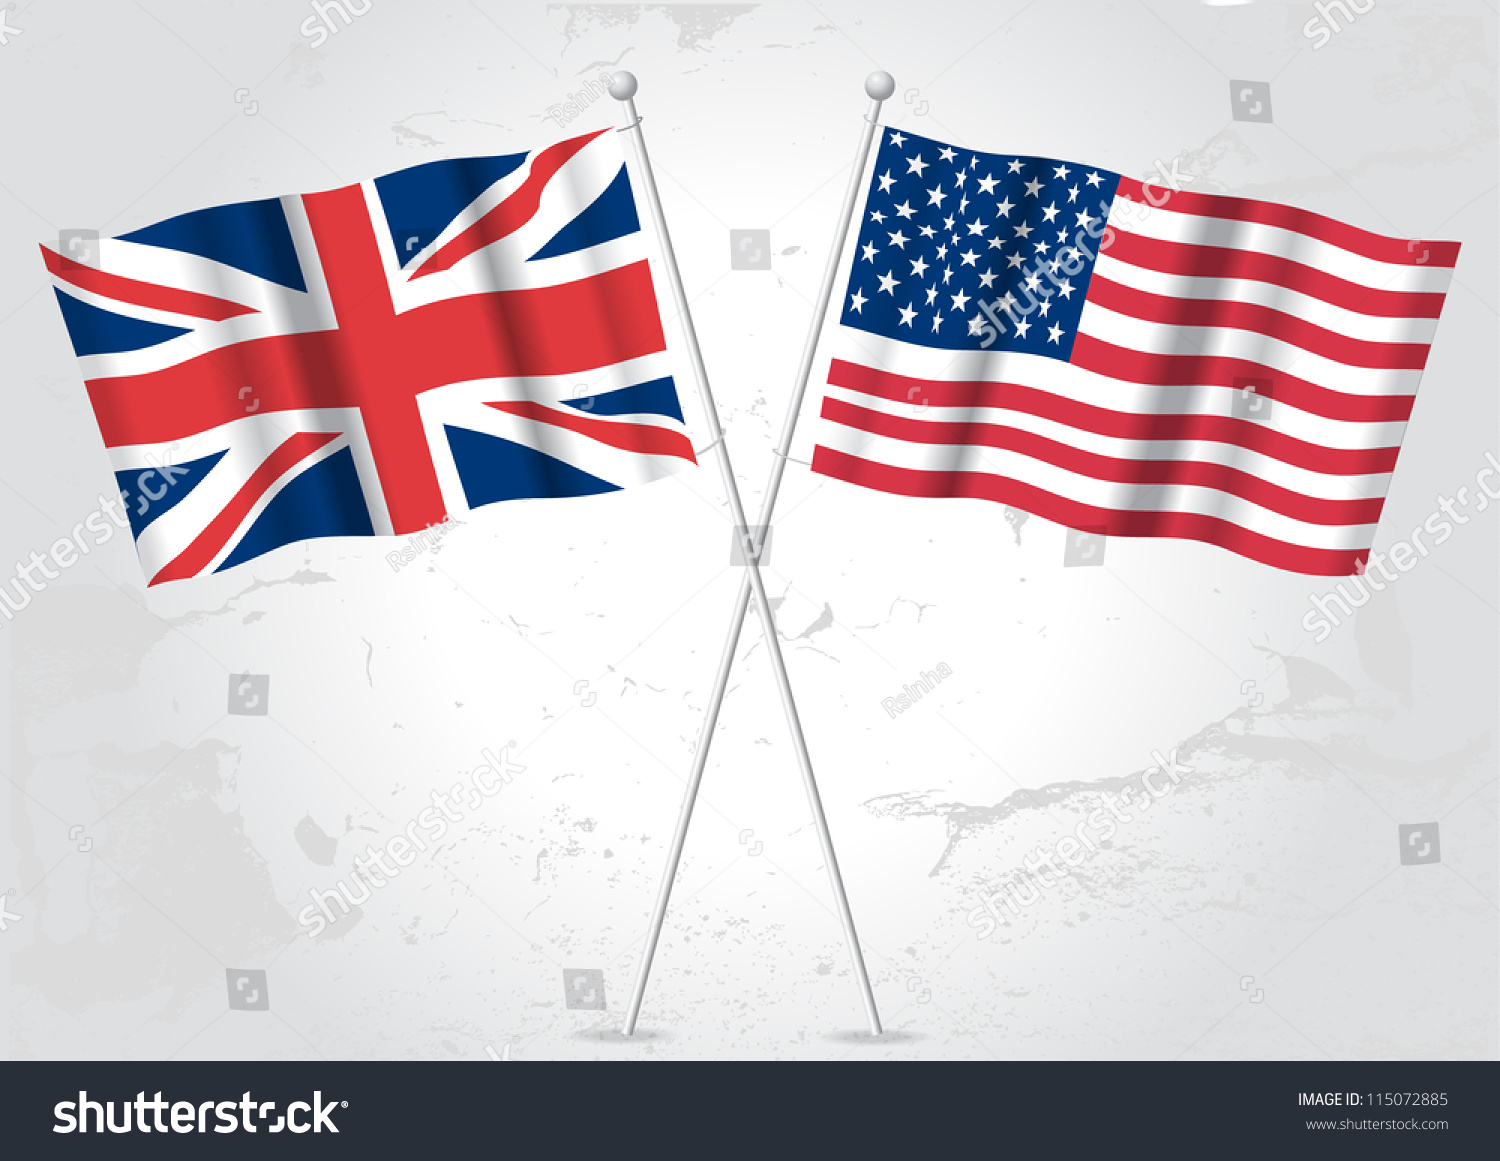 SVG of UK United kingdom and USA American flags. svg